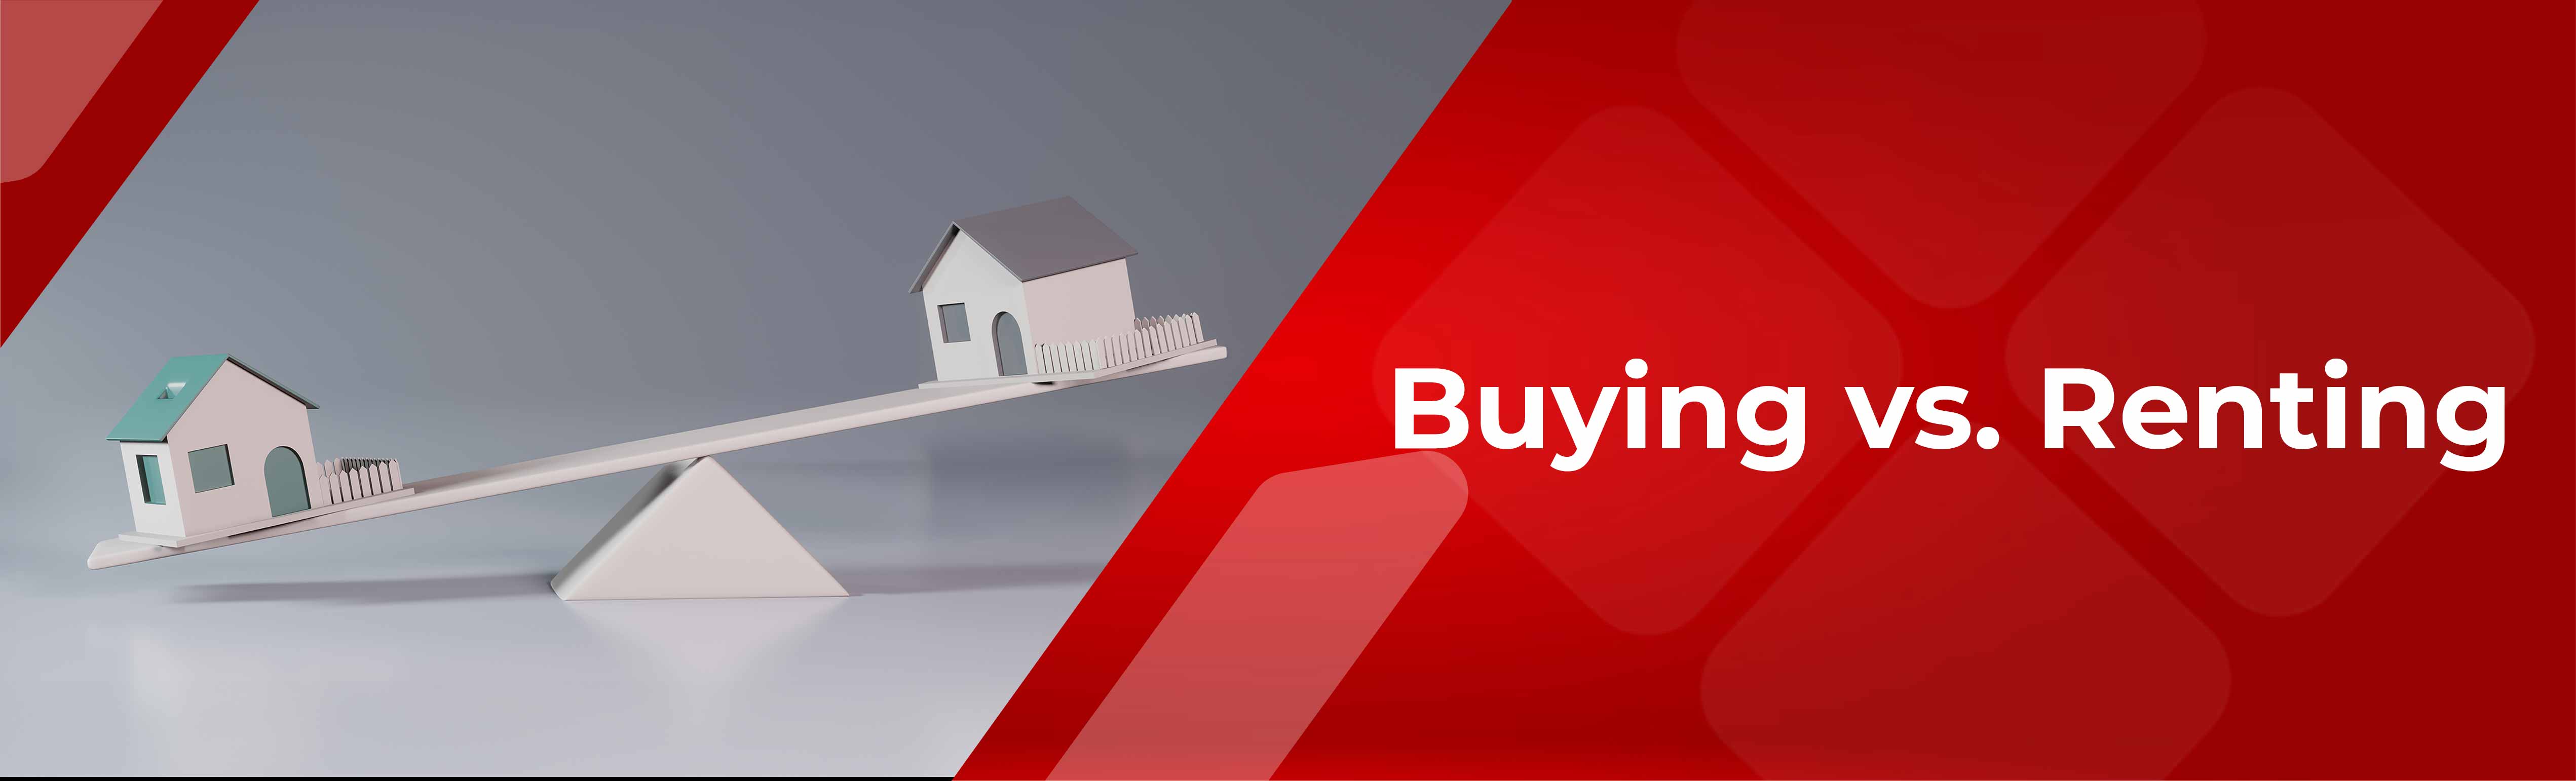 Buying vs. Renting - miniature setup of two houses on each side of a lever